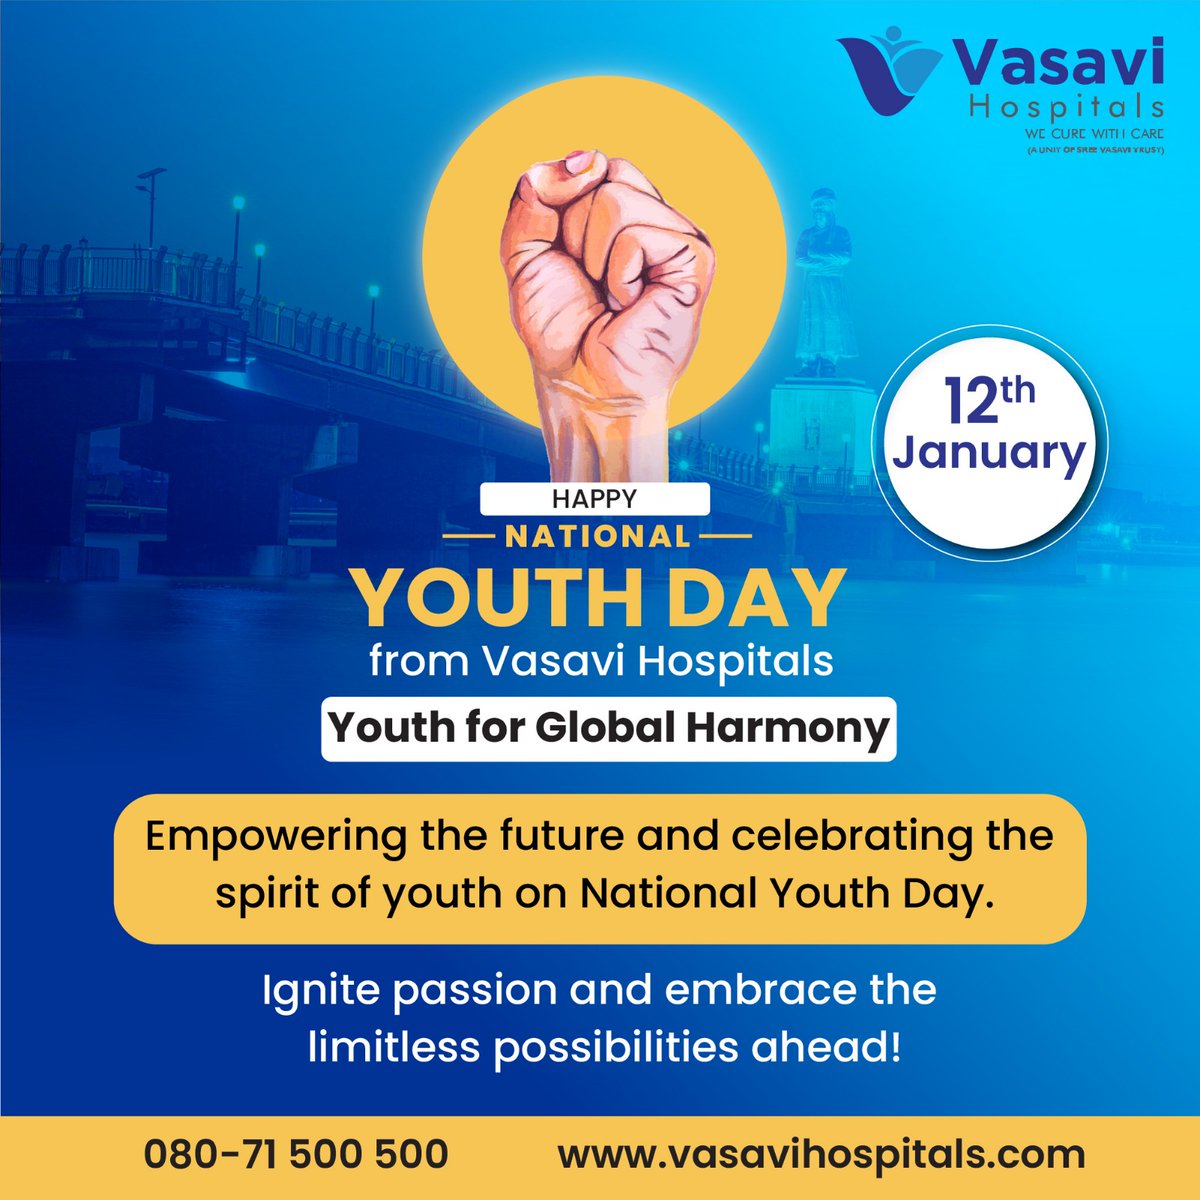 Vasavi Hospital wishes on National Youth Day with boundless enthusiasm! This day is a vibrant tribute to the dynamic spirit of youth for global harmony. 
#VasaviHospitalsbangalore #VasaviHospital #Healthcarebangalore #MedicalExcellence #HealthAndWellness #MultiSpecialtyCare